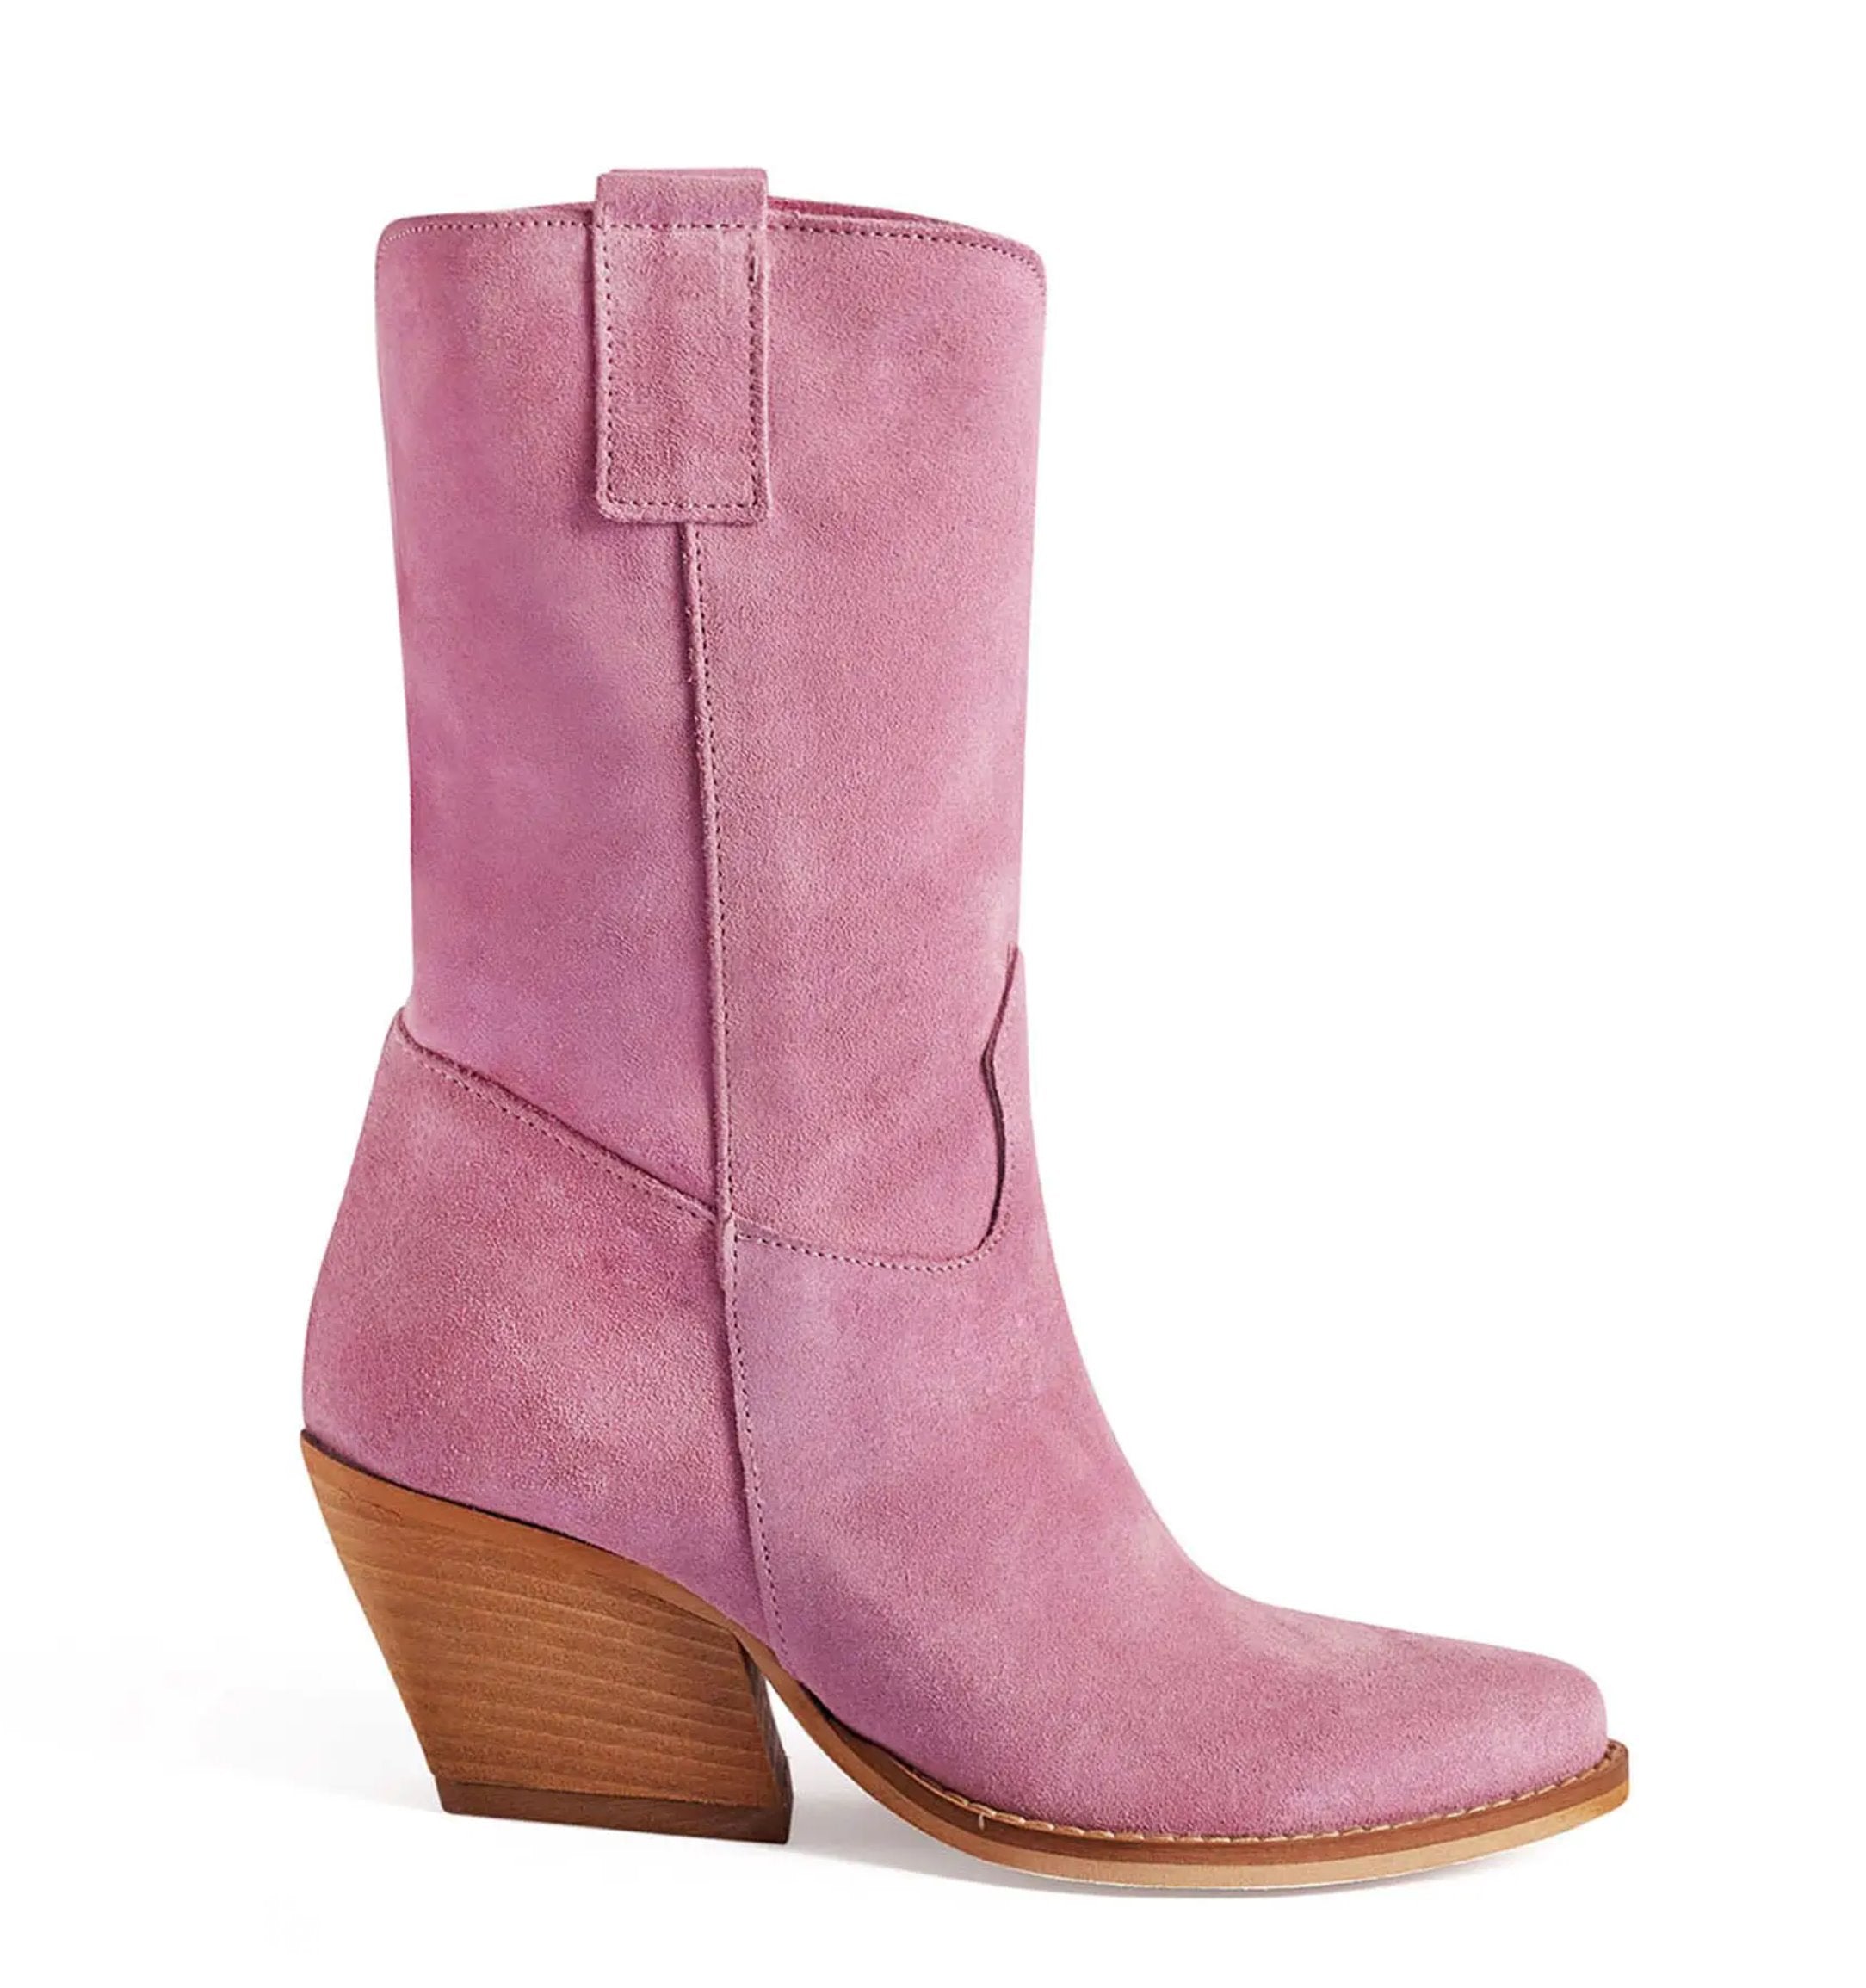 MOLLY TEXAN BOOTS BOOT KALI SHOES PINK 37 